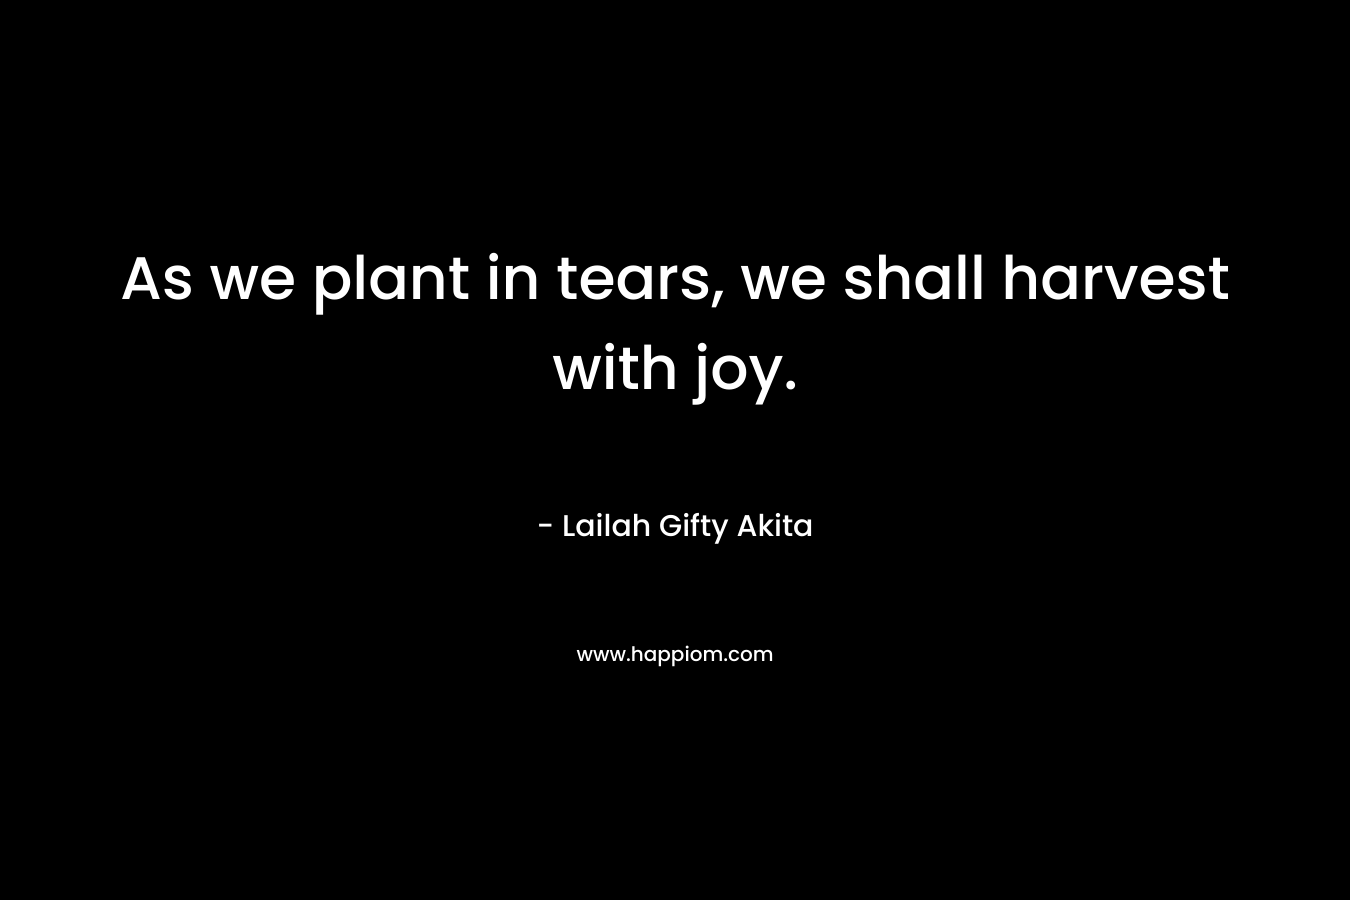 As we plant in tears, we shall harvest with joy.